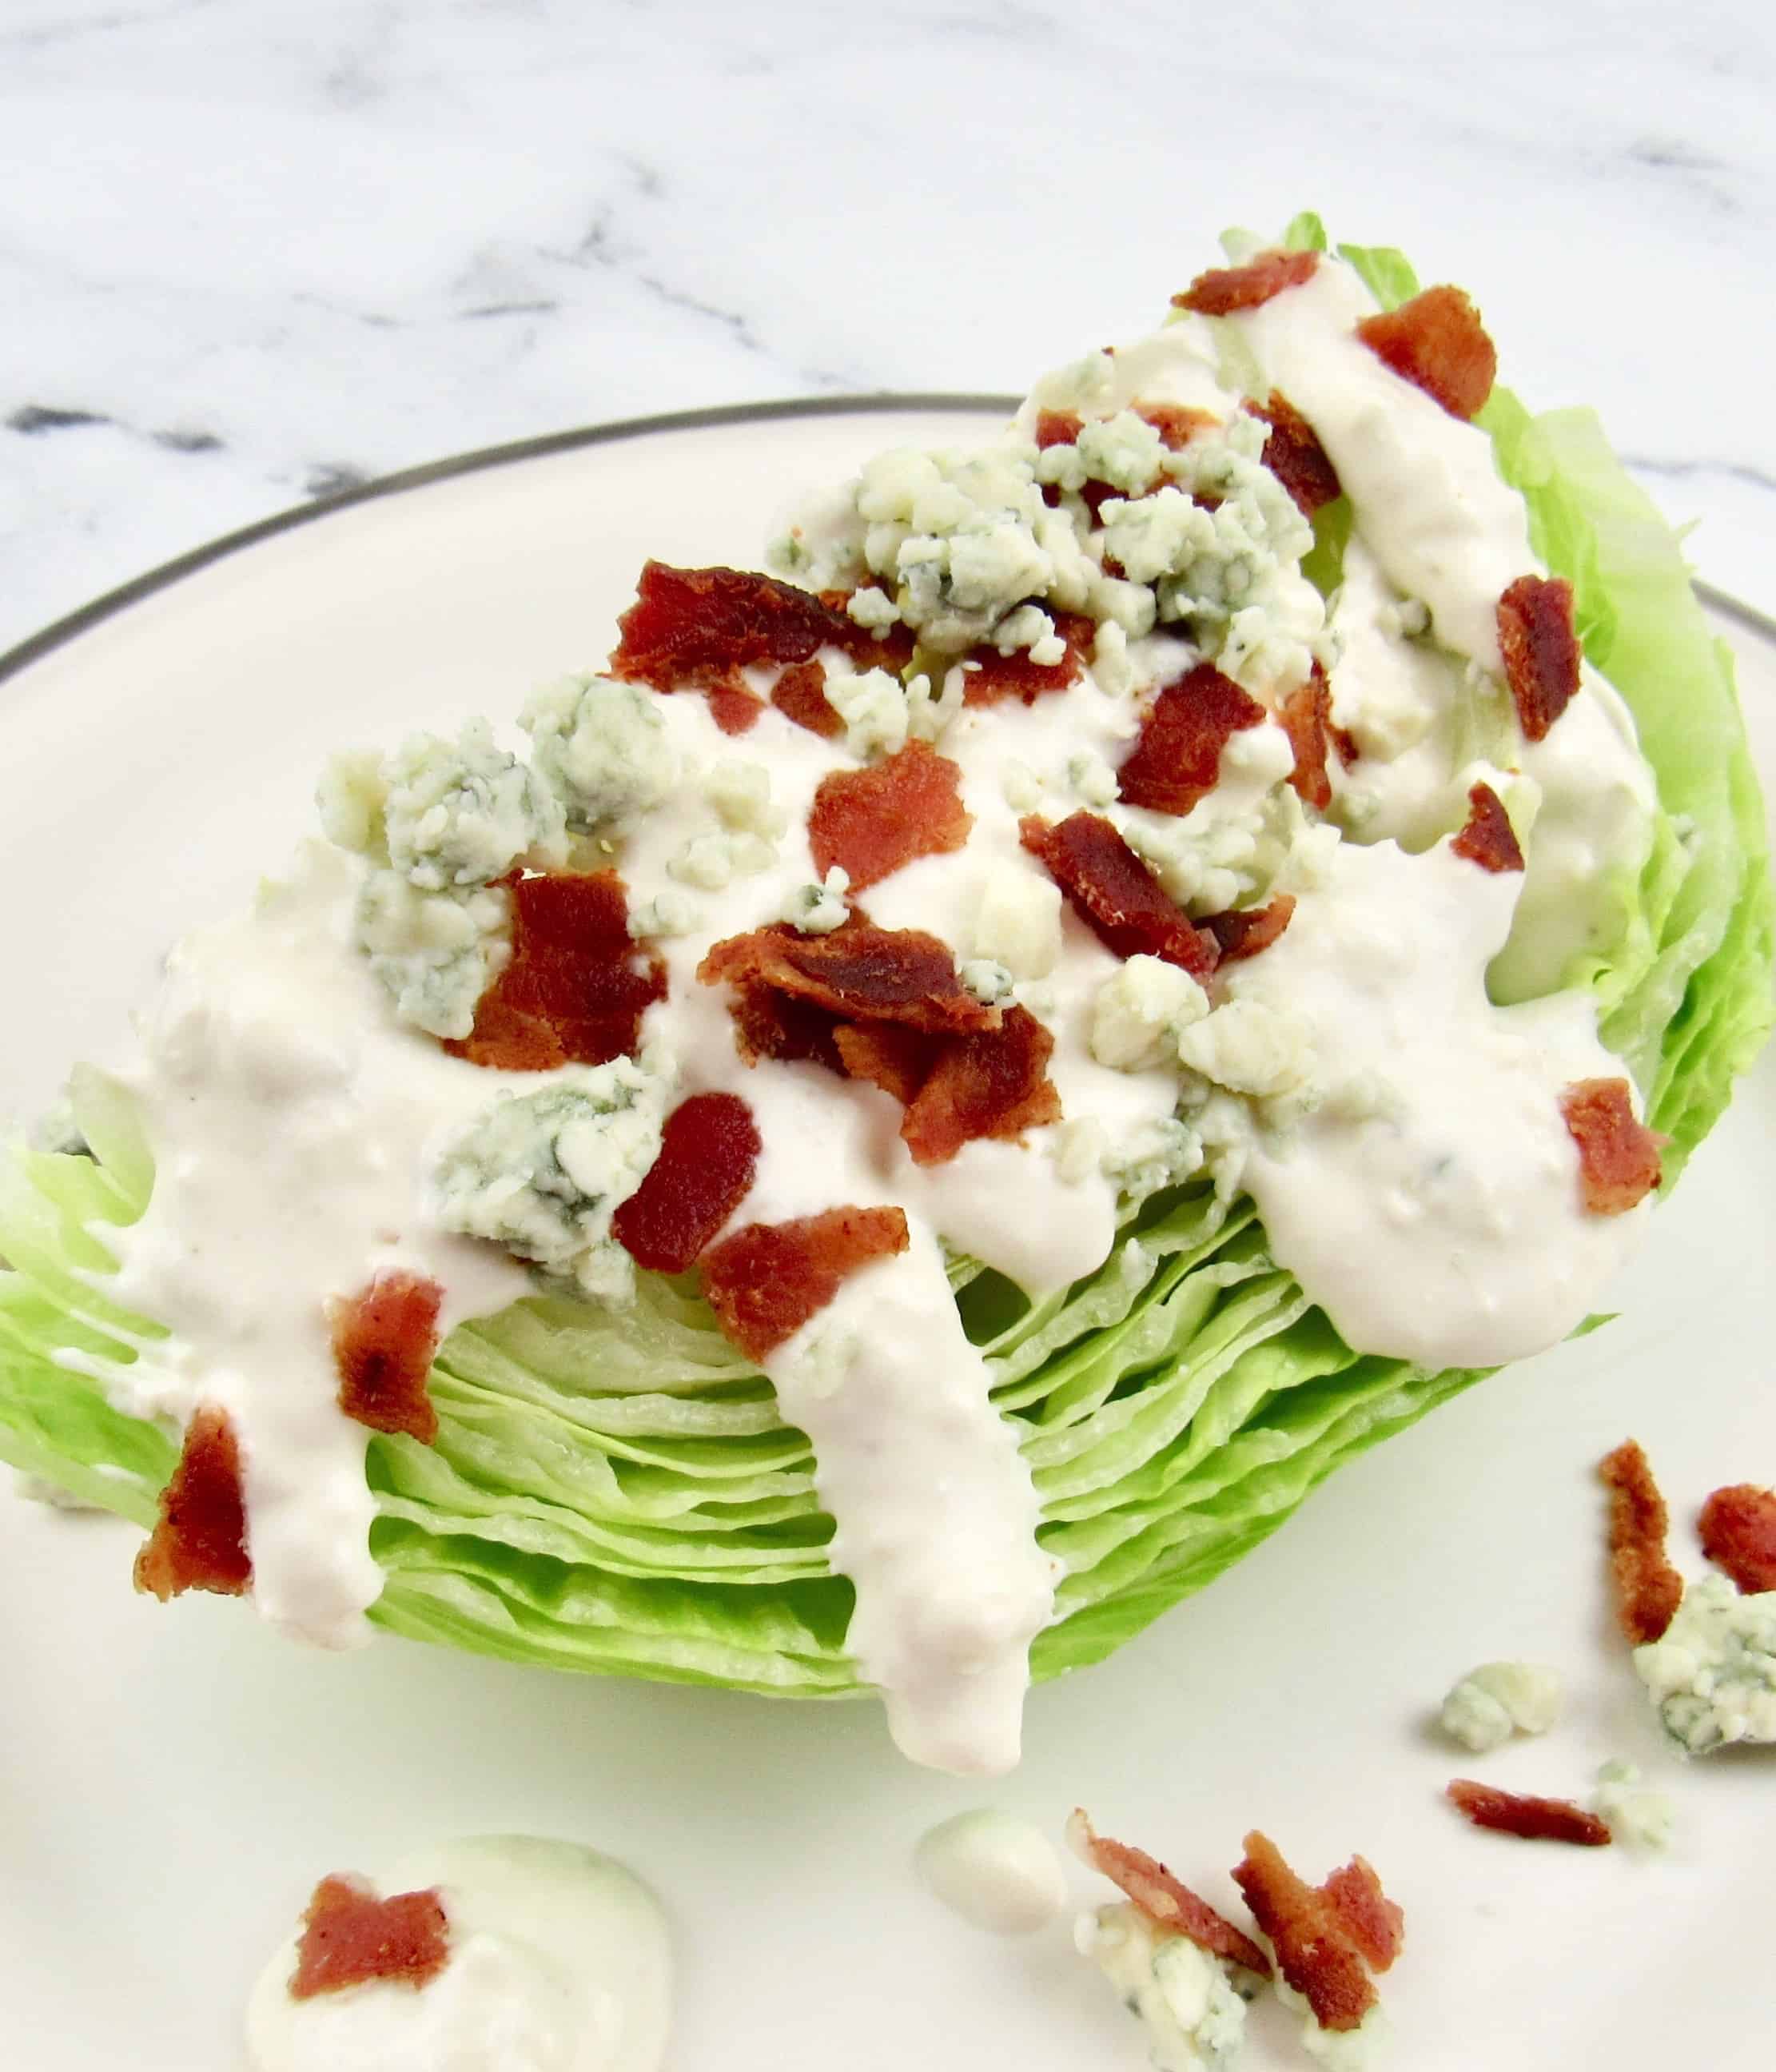 wedge of iceberg lettuce topped with blue cheese dressing, crumbles and bacon